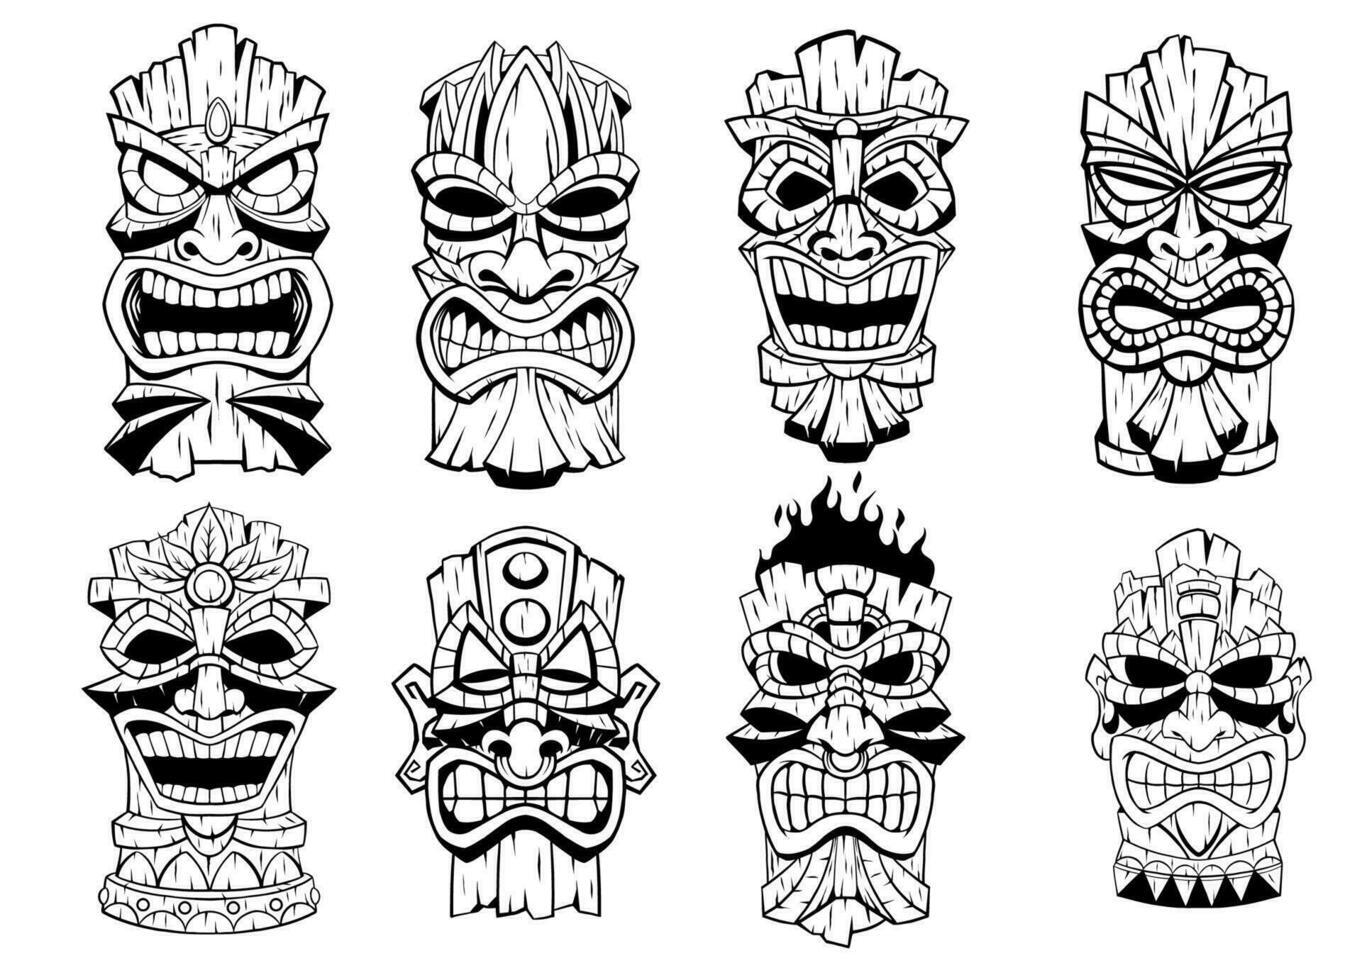 Tiki Mask Set Collection in Black and White hand drawn vector